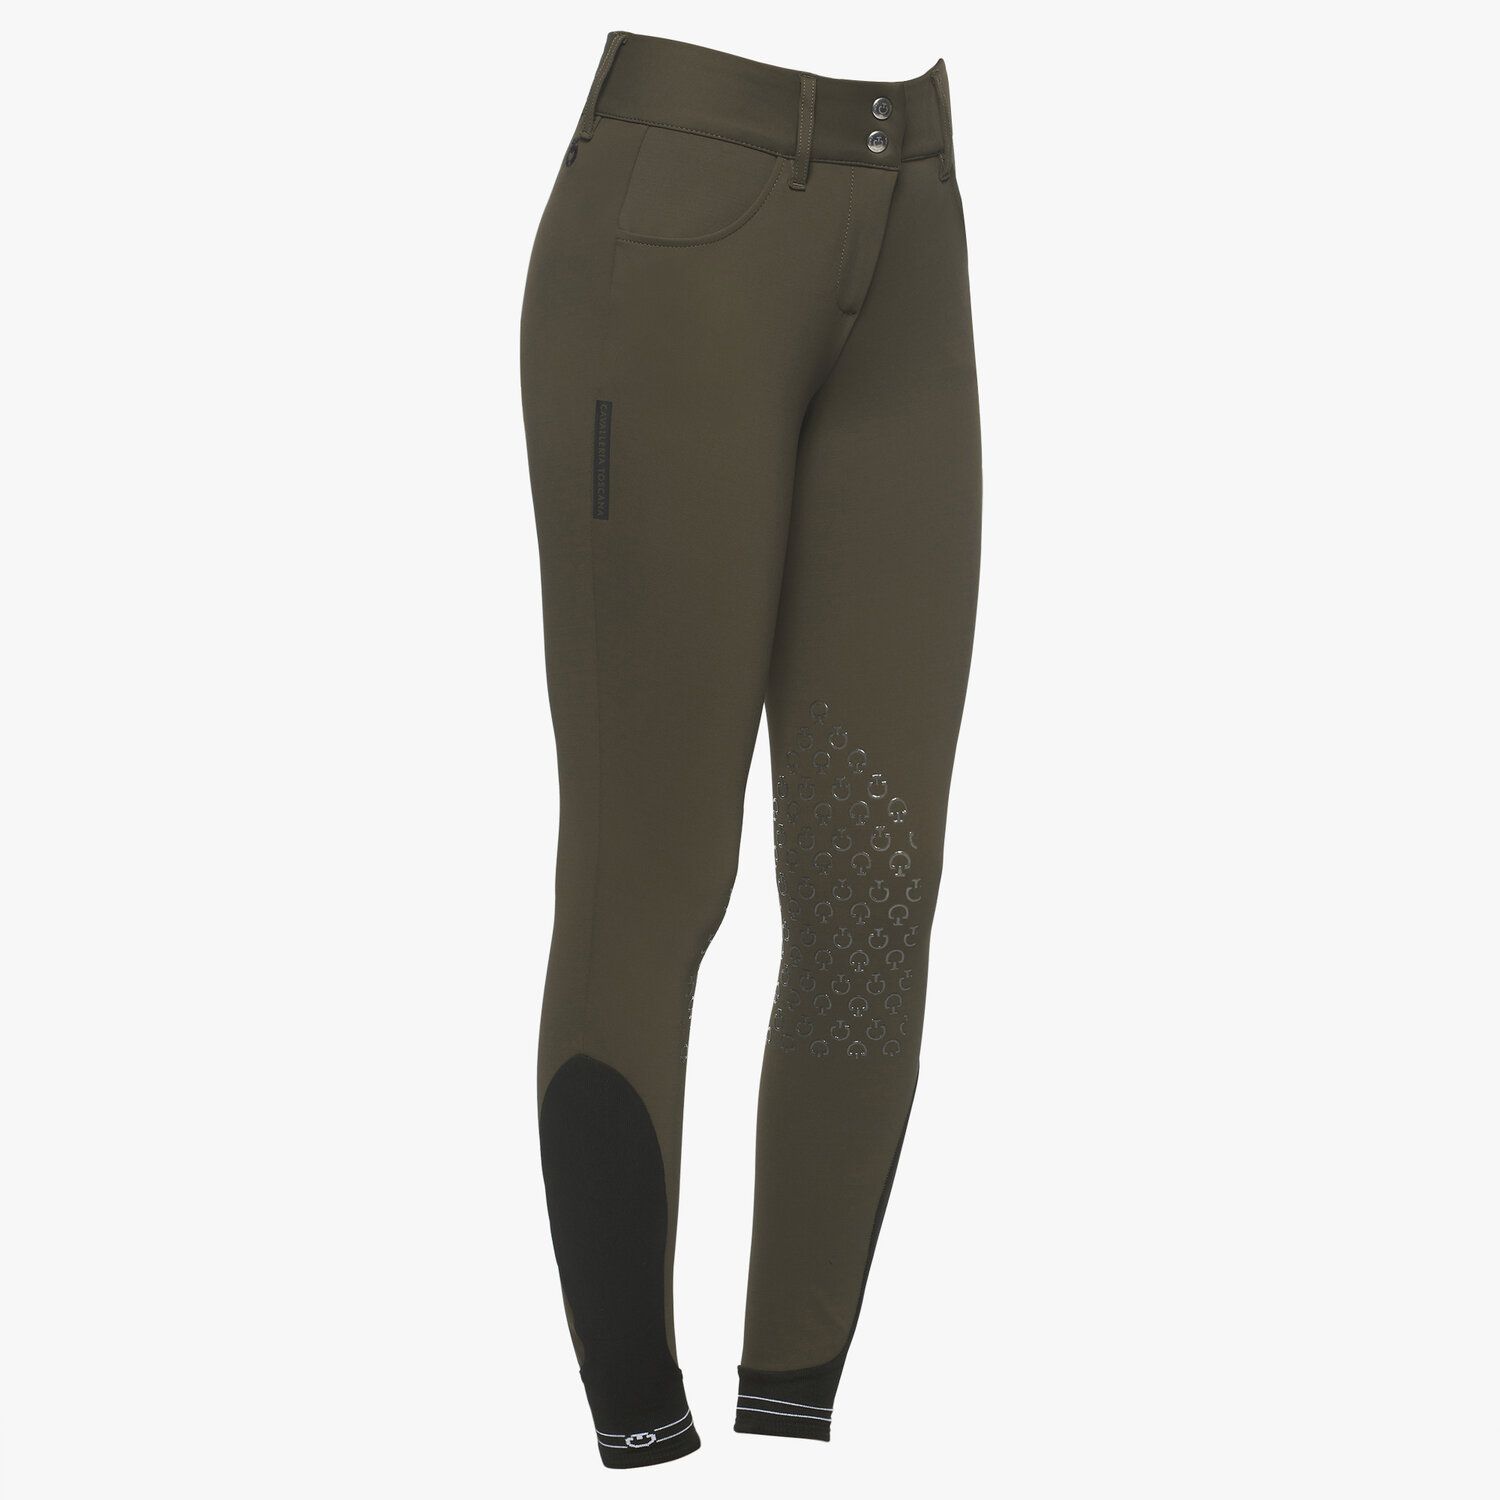 Cavalleria Toscana Women's dressage breeches with perforated logo tape MILITARY GREEN-2